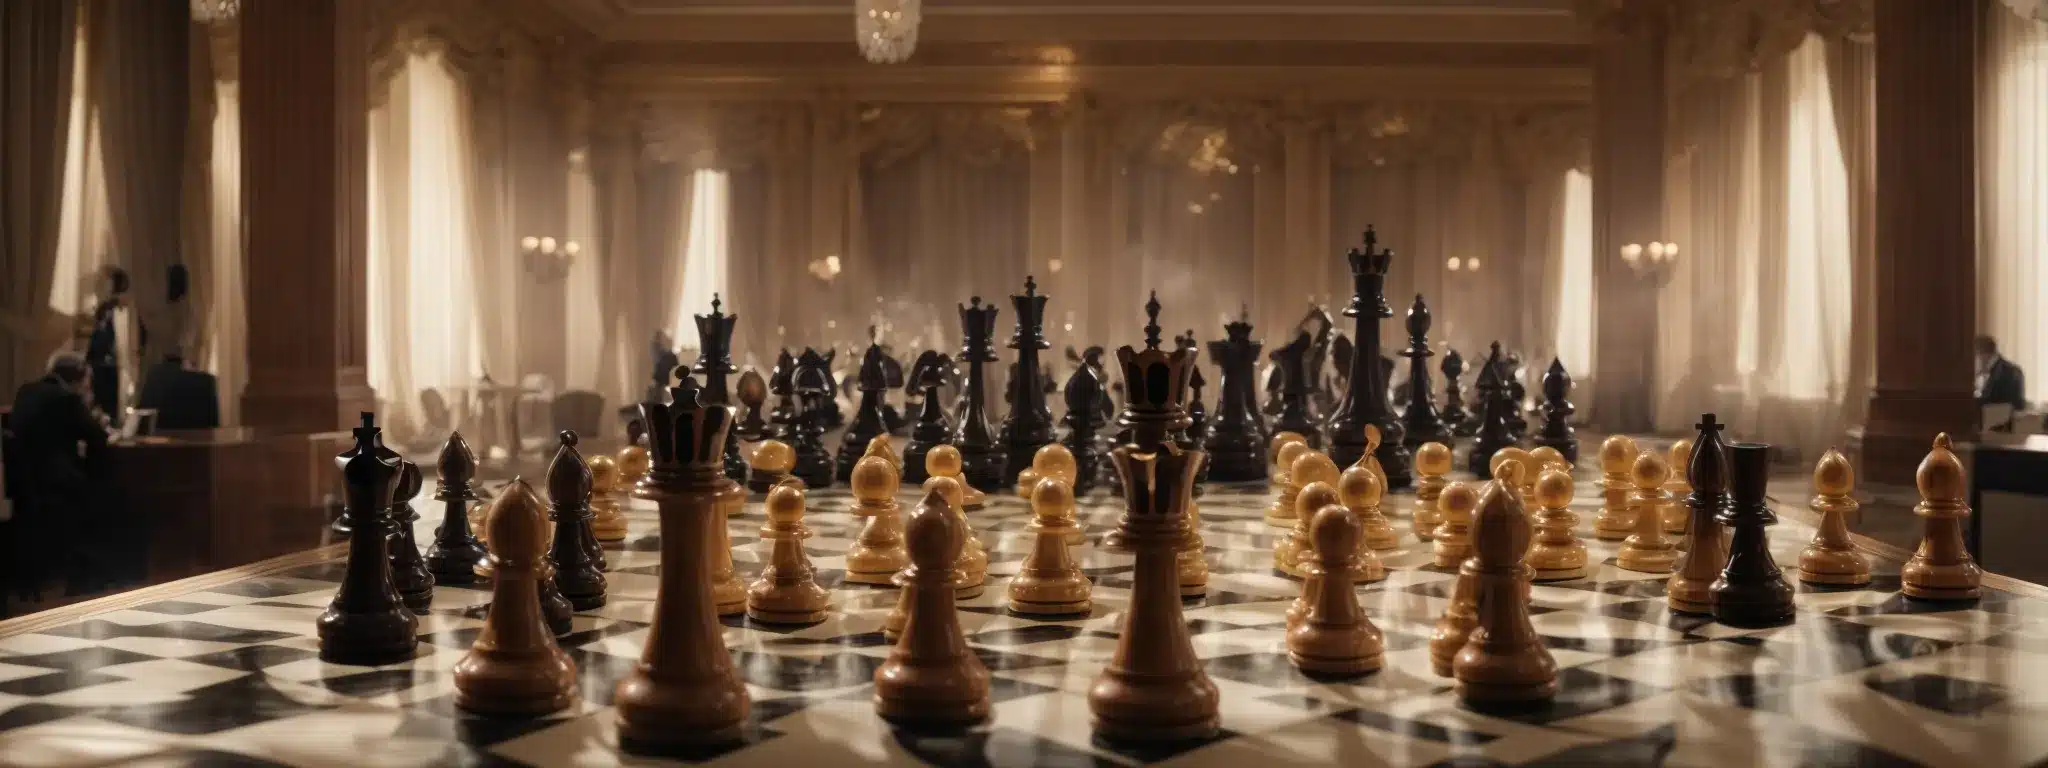 A Grand Chessboard Set Amidst A Bustling, Elegant Ballroom, Where Each Chess Piece Symbolizes A Different Aspect Of Brand Strategy In A Dance Of Competition And Adaptation.